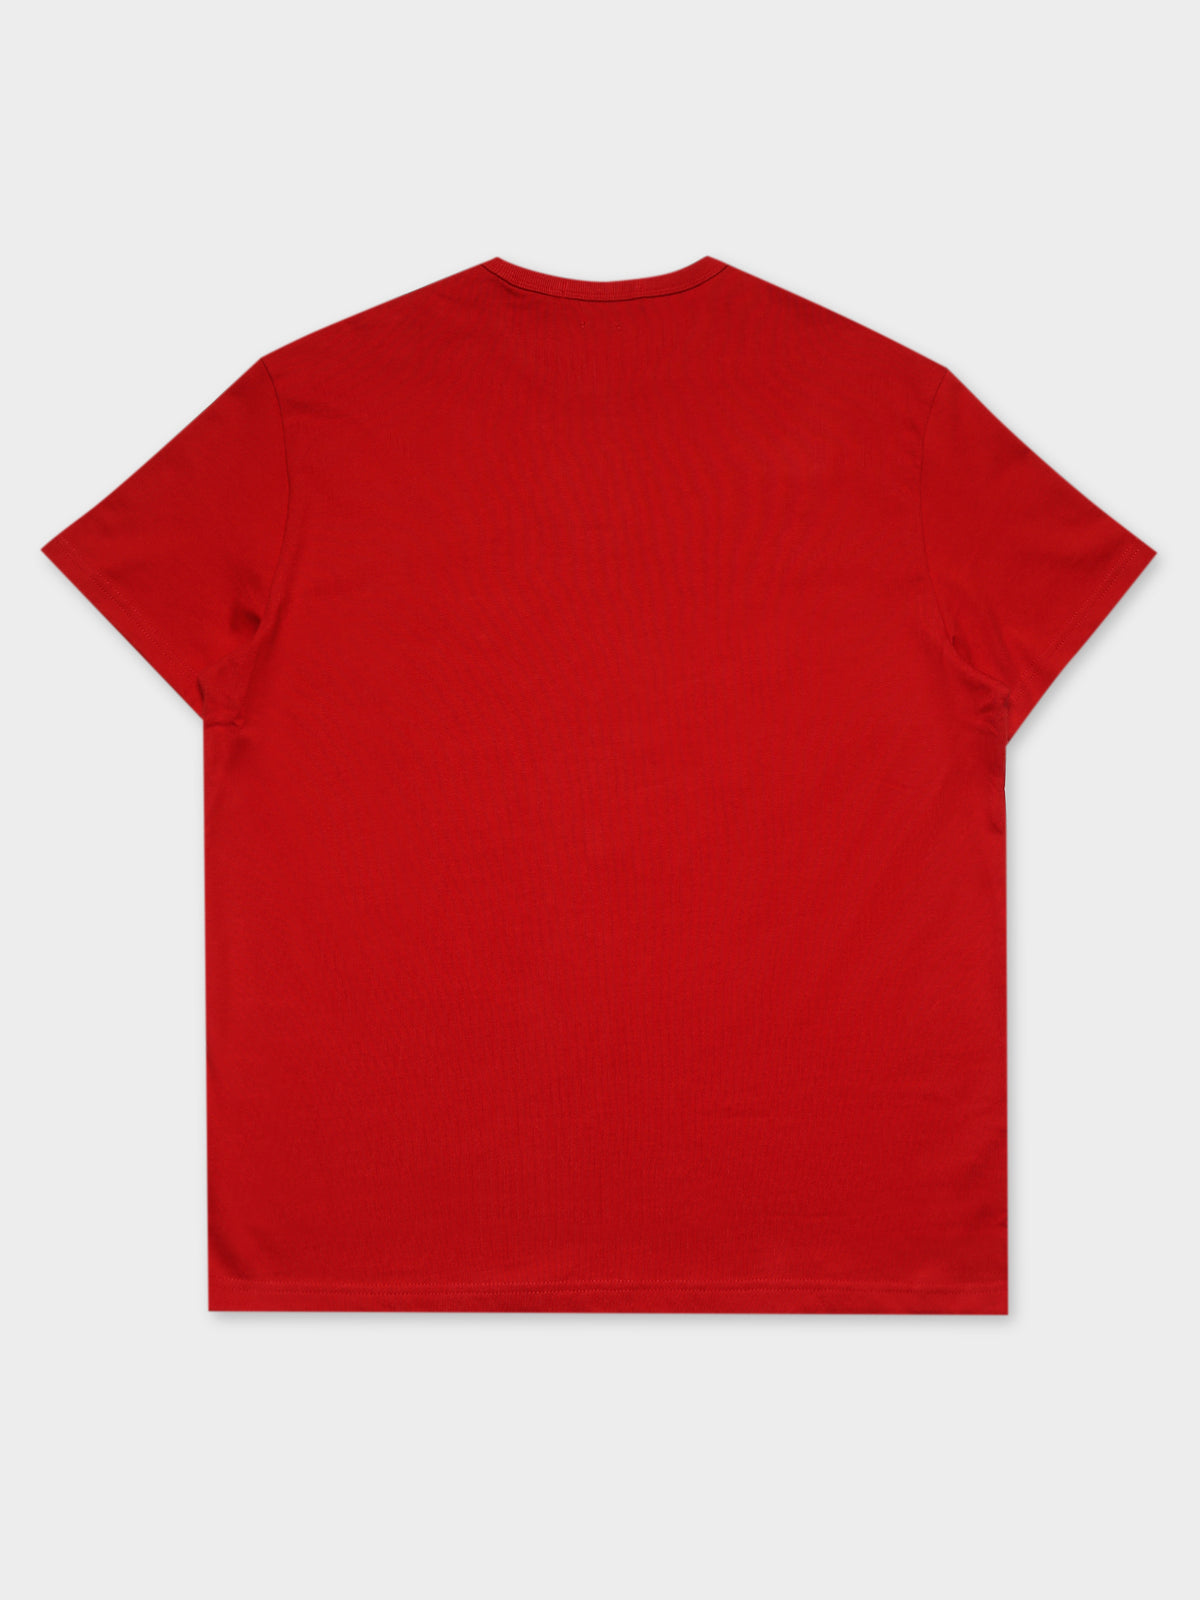 Polo Sport T-Shirt in Red